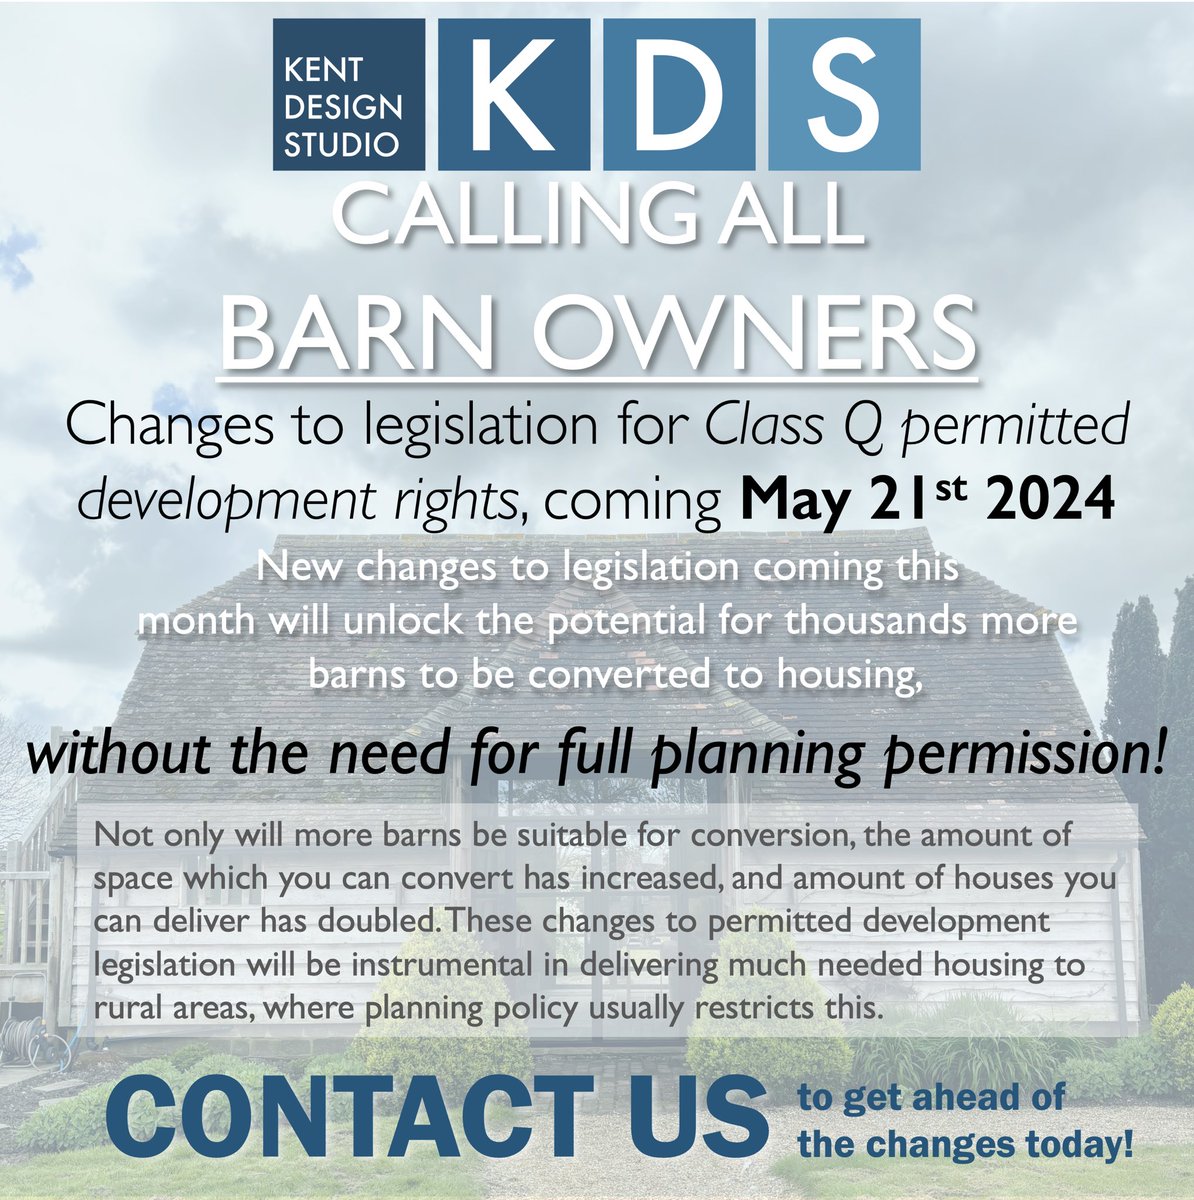 CALLING ALL BARN OWNERS
Changes to legislation for Class Q permitted development rights, coming 21st May 2024.
#kentplanning #ruralbusiness  #development #barnowners #barnconversion #changeofuse #kent #legislation #planningpermission #housing #agriculturalbarn #classq